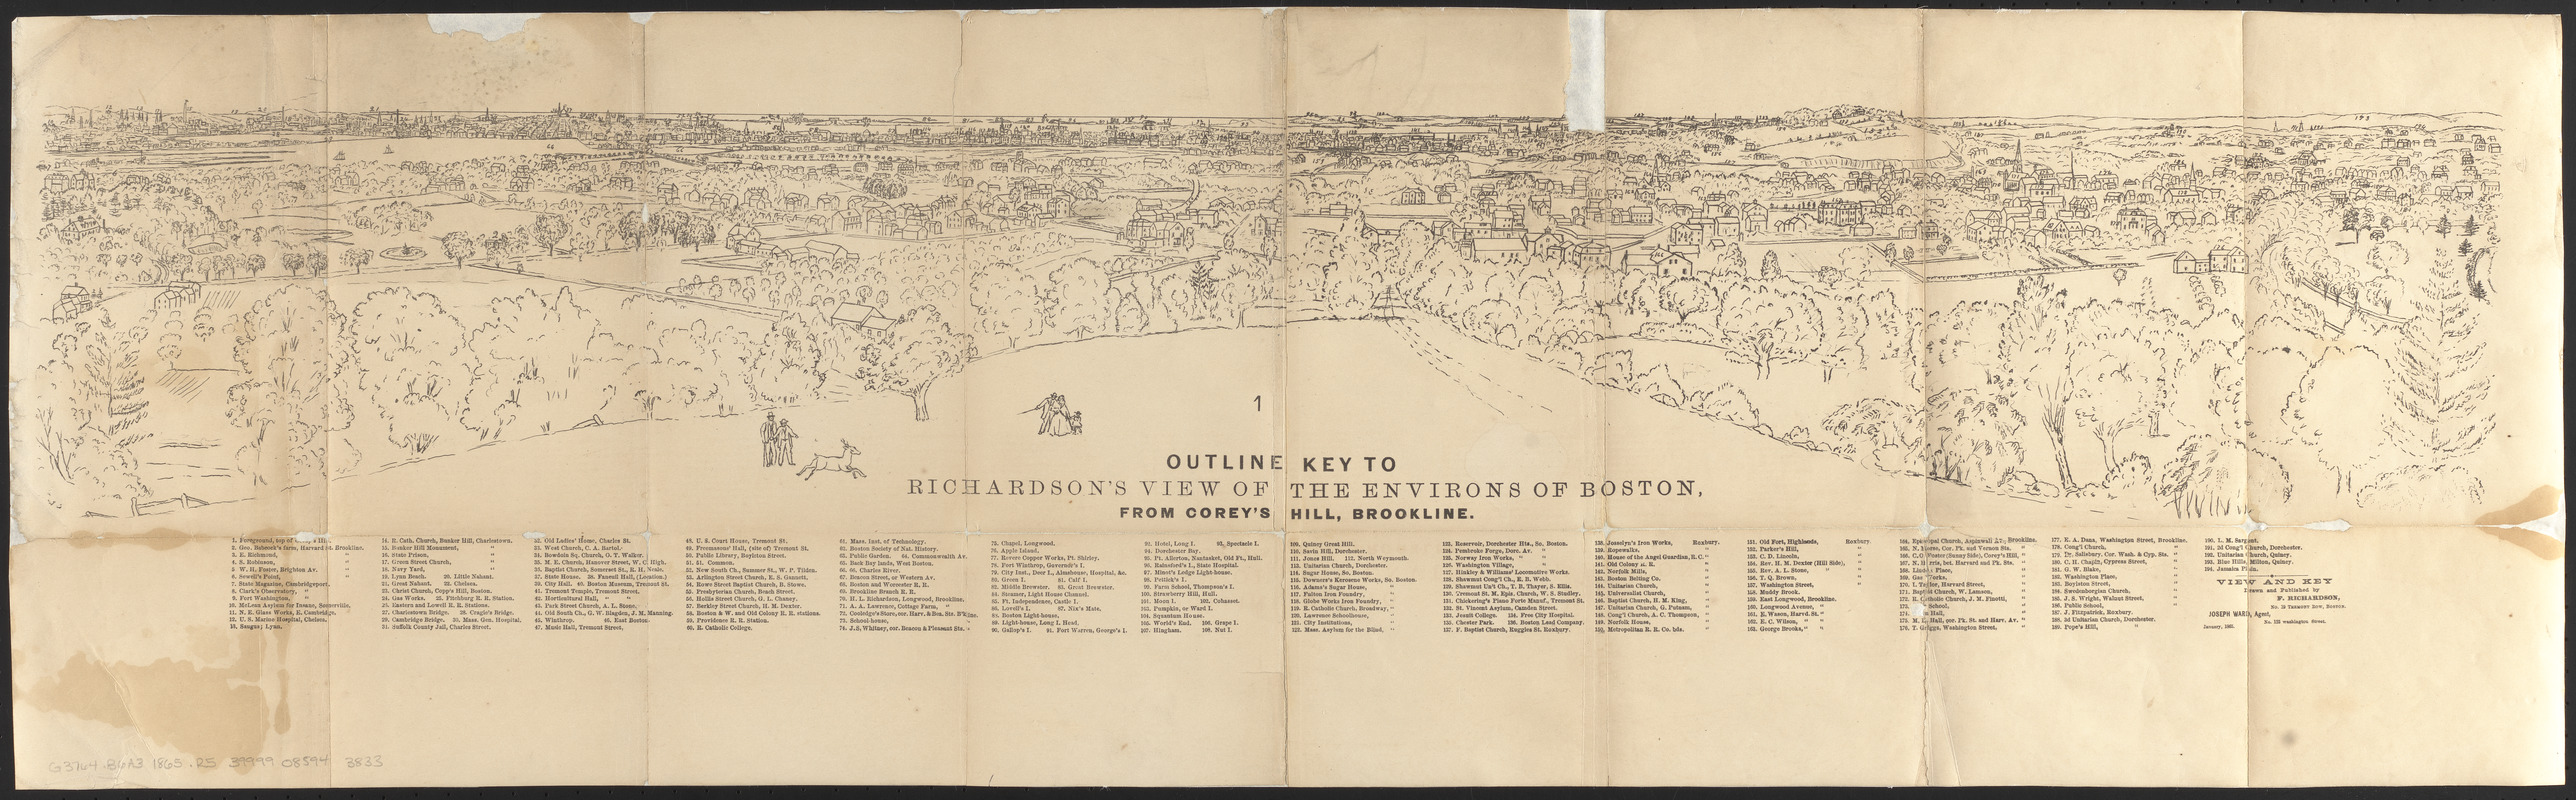 Outline key to Richardson's view of the environs of Boston from Corey's Hill, Brookline